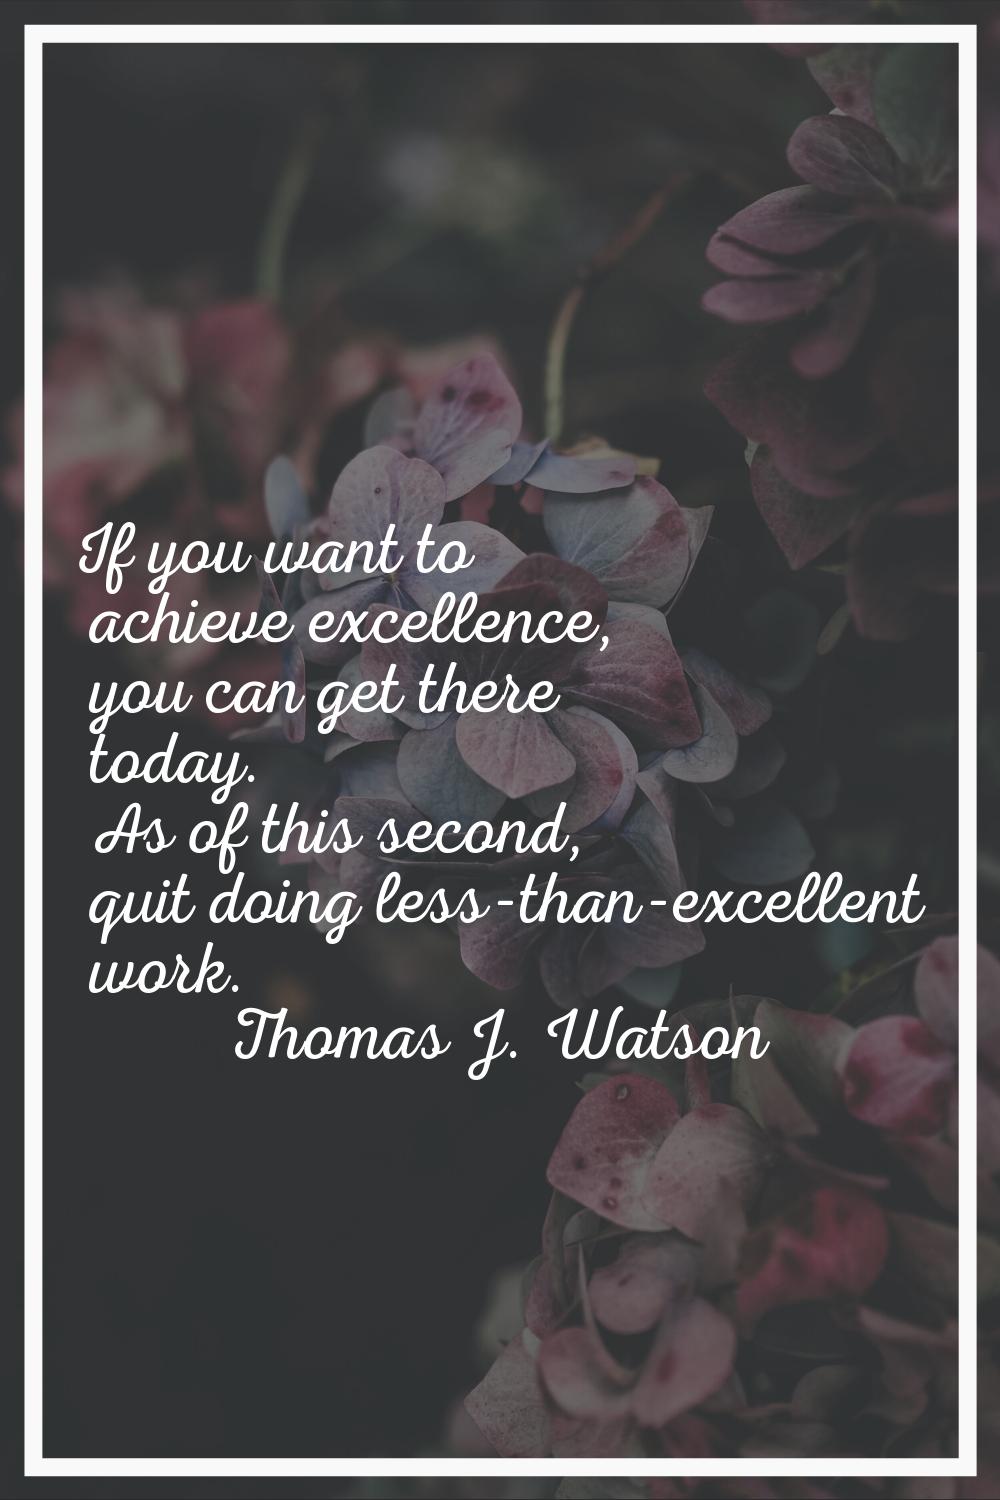 If you want to achieve excellence, you can get there today. As of this second, quit doing less-than